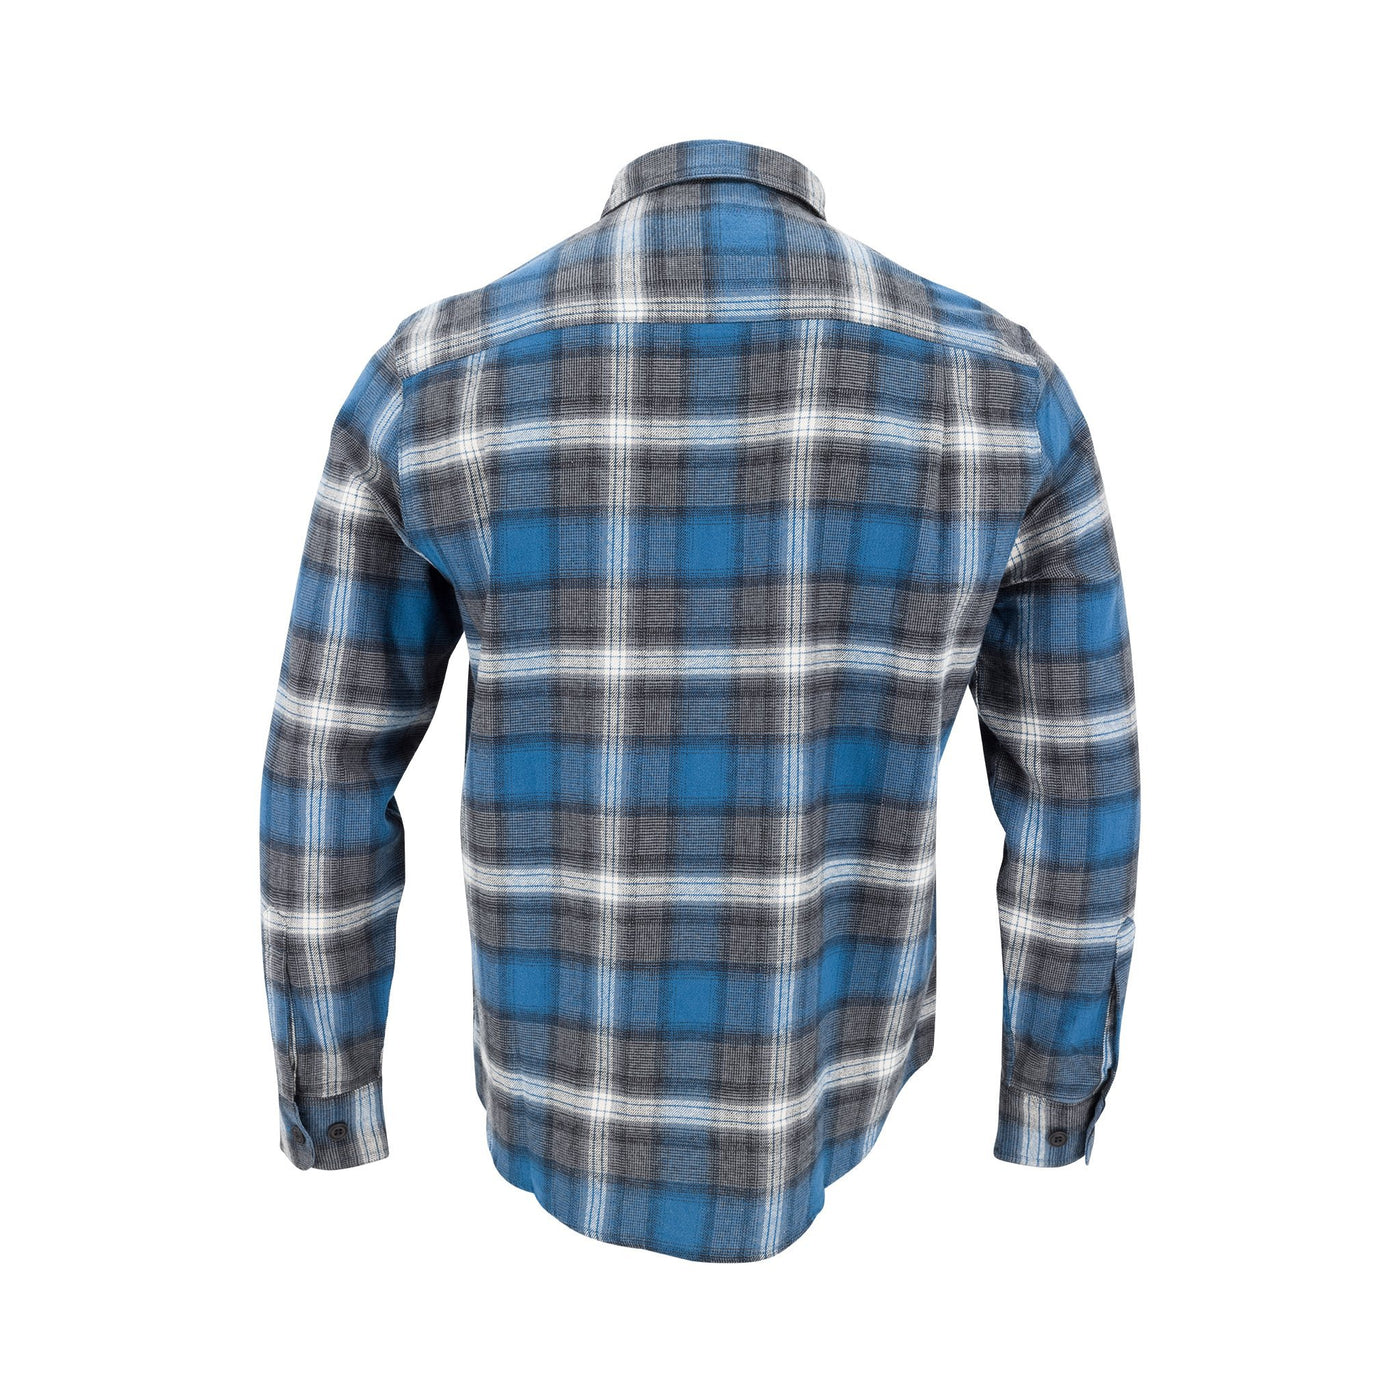 The American Outdoorsman Men's Long Sleeve Midweight Plaid Flannel Button Down Shirt (Red/Wht/Blue, Medium)